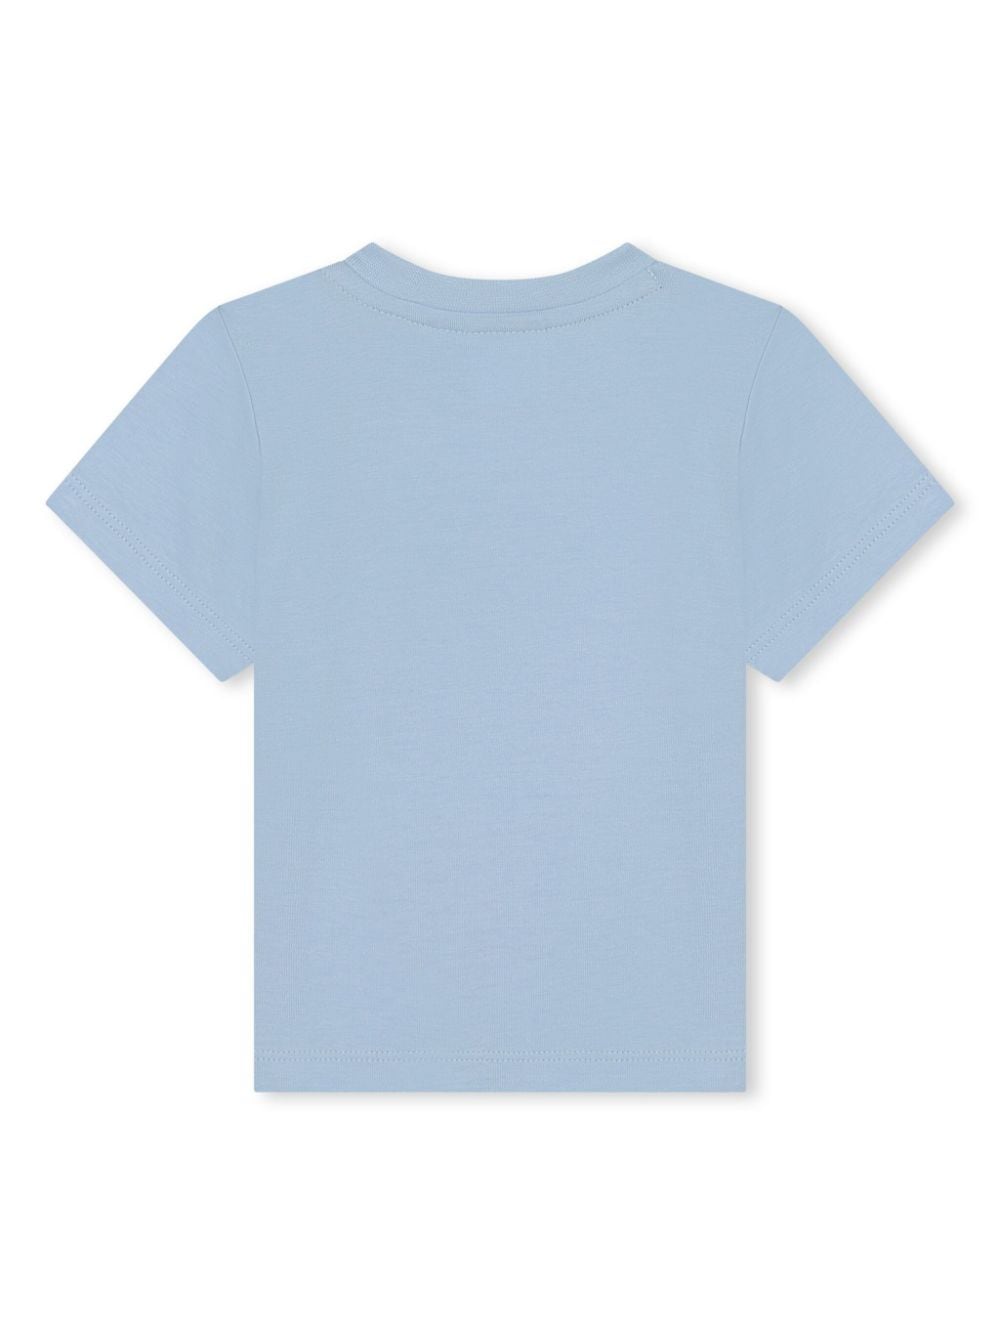 Light blue baby t-shirt with logo